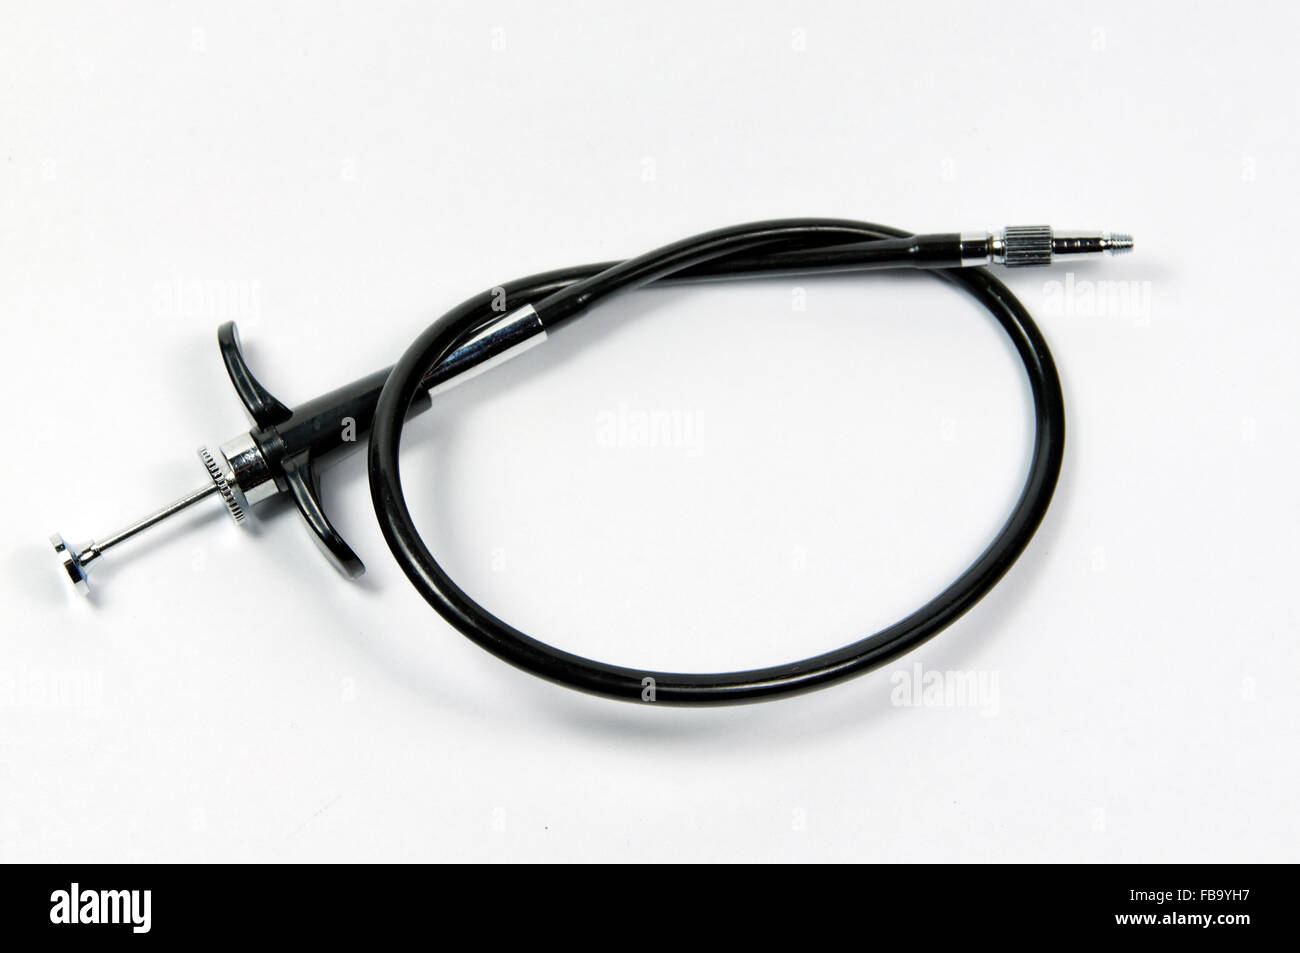 Camera cable release. Stock Photo